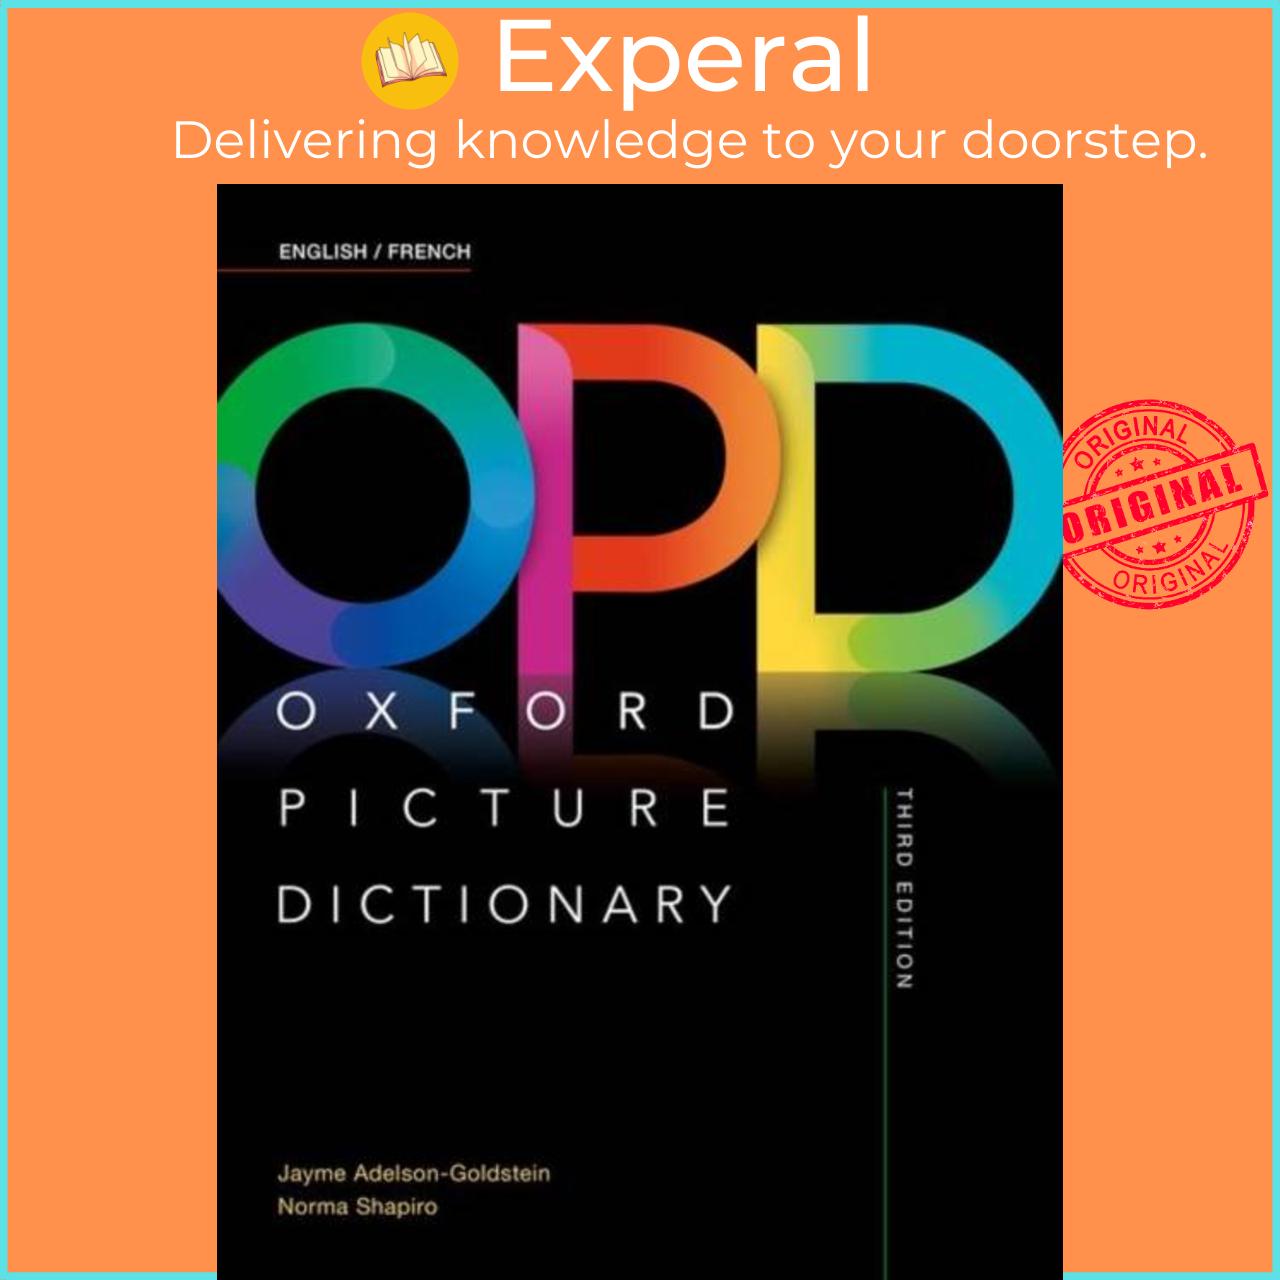 Hình ảnh Sách - Oxford Picture Dictionary: English/French Dictionary by Norma Shapiro (UK edition, paperback)